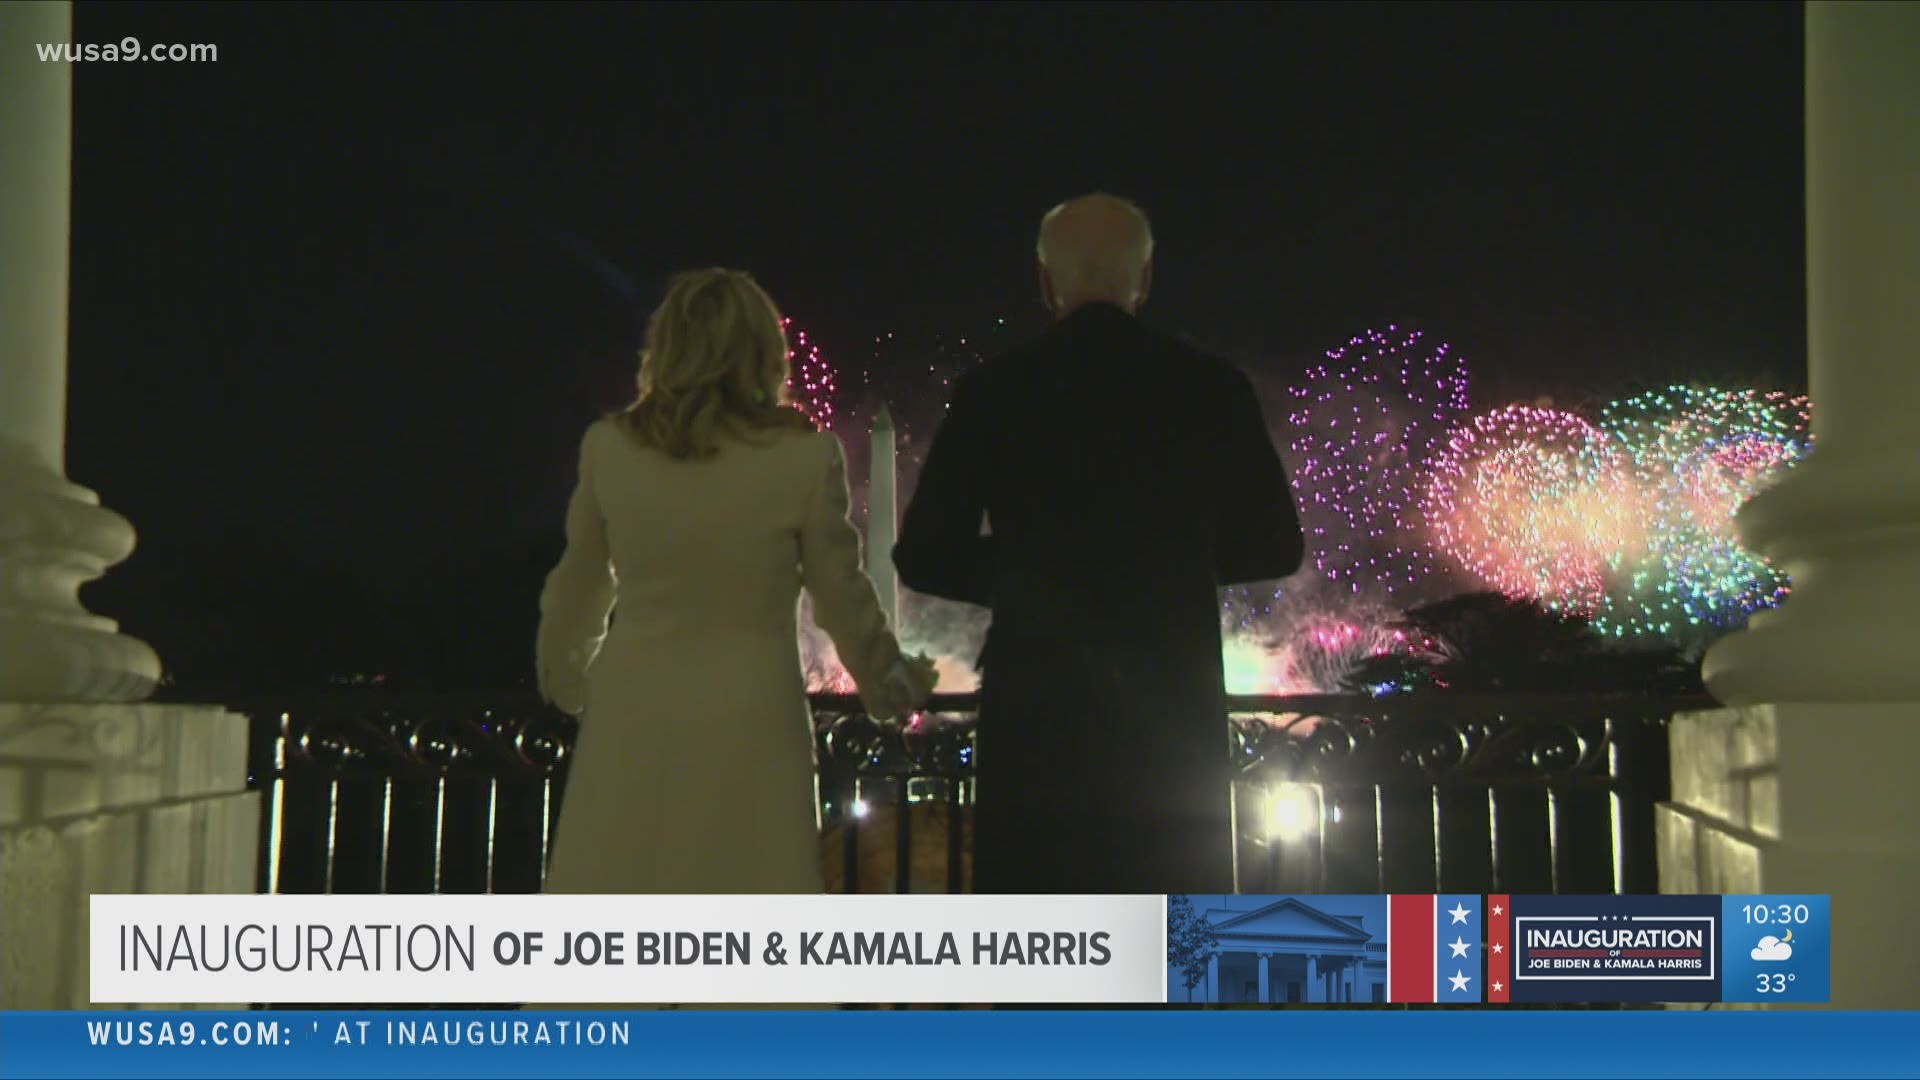 President Joe Biden and First Lady Dr. Jill Biden took it in from the White House on their first night as the first couple.